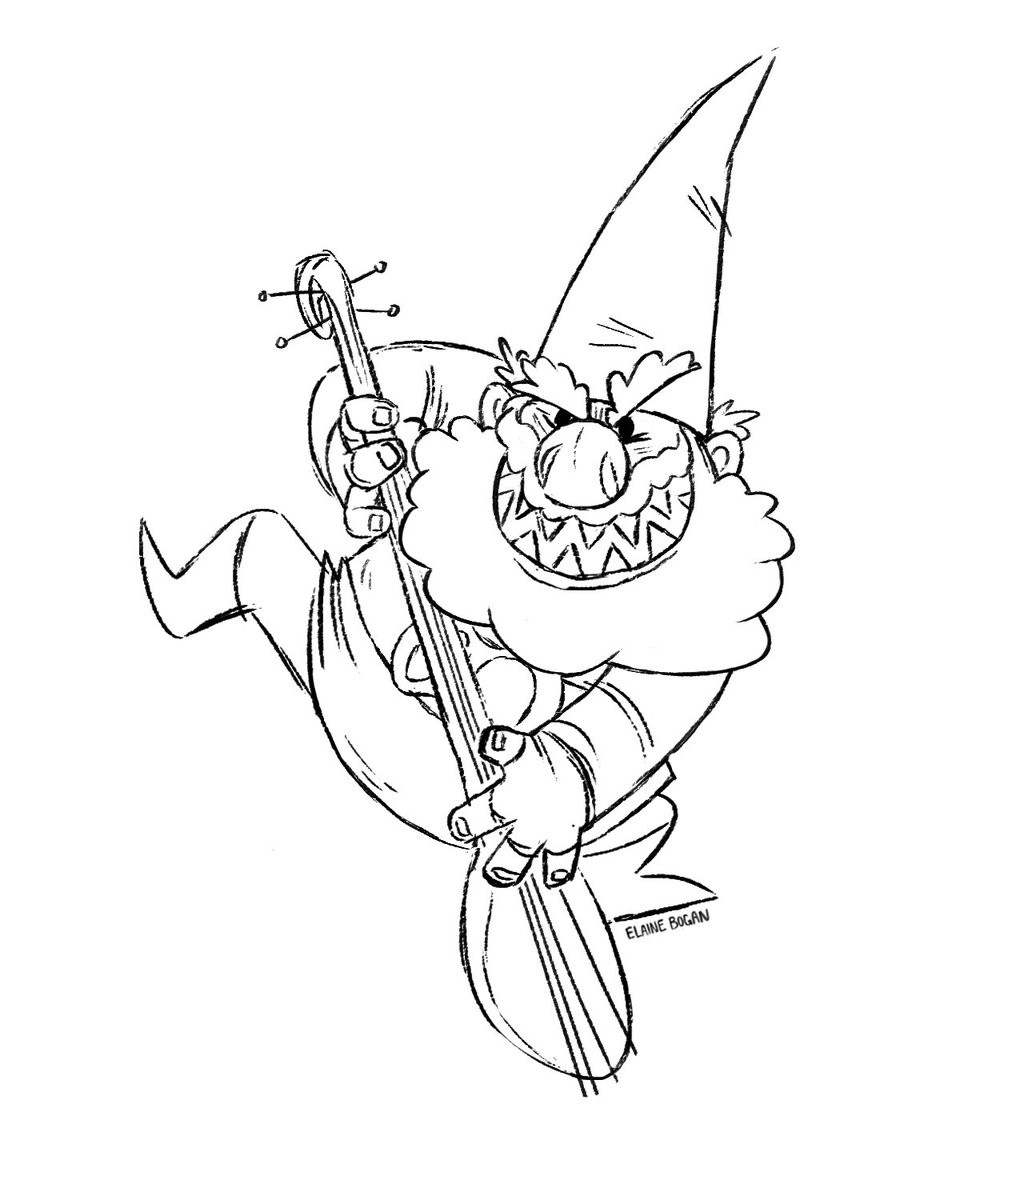 Troll Hunter Coloring Pages
 Troll Hunter Netflix Series Coloring Pages Coloring Pages